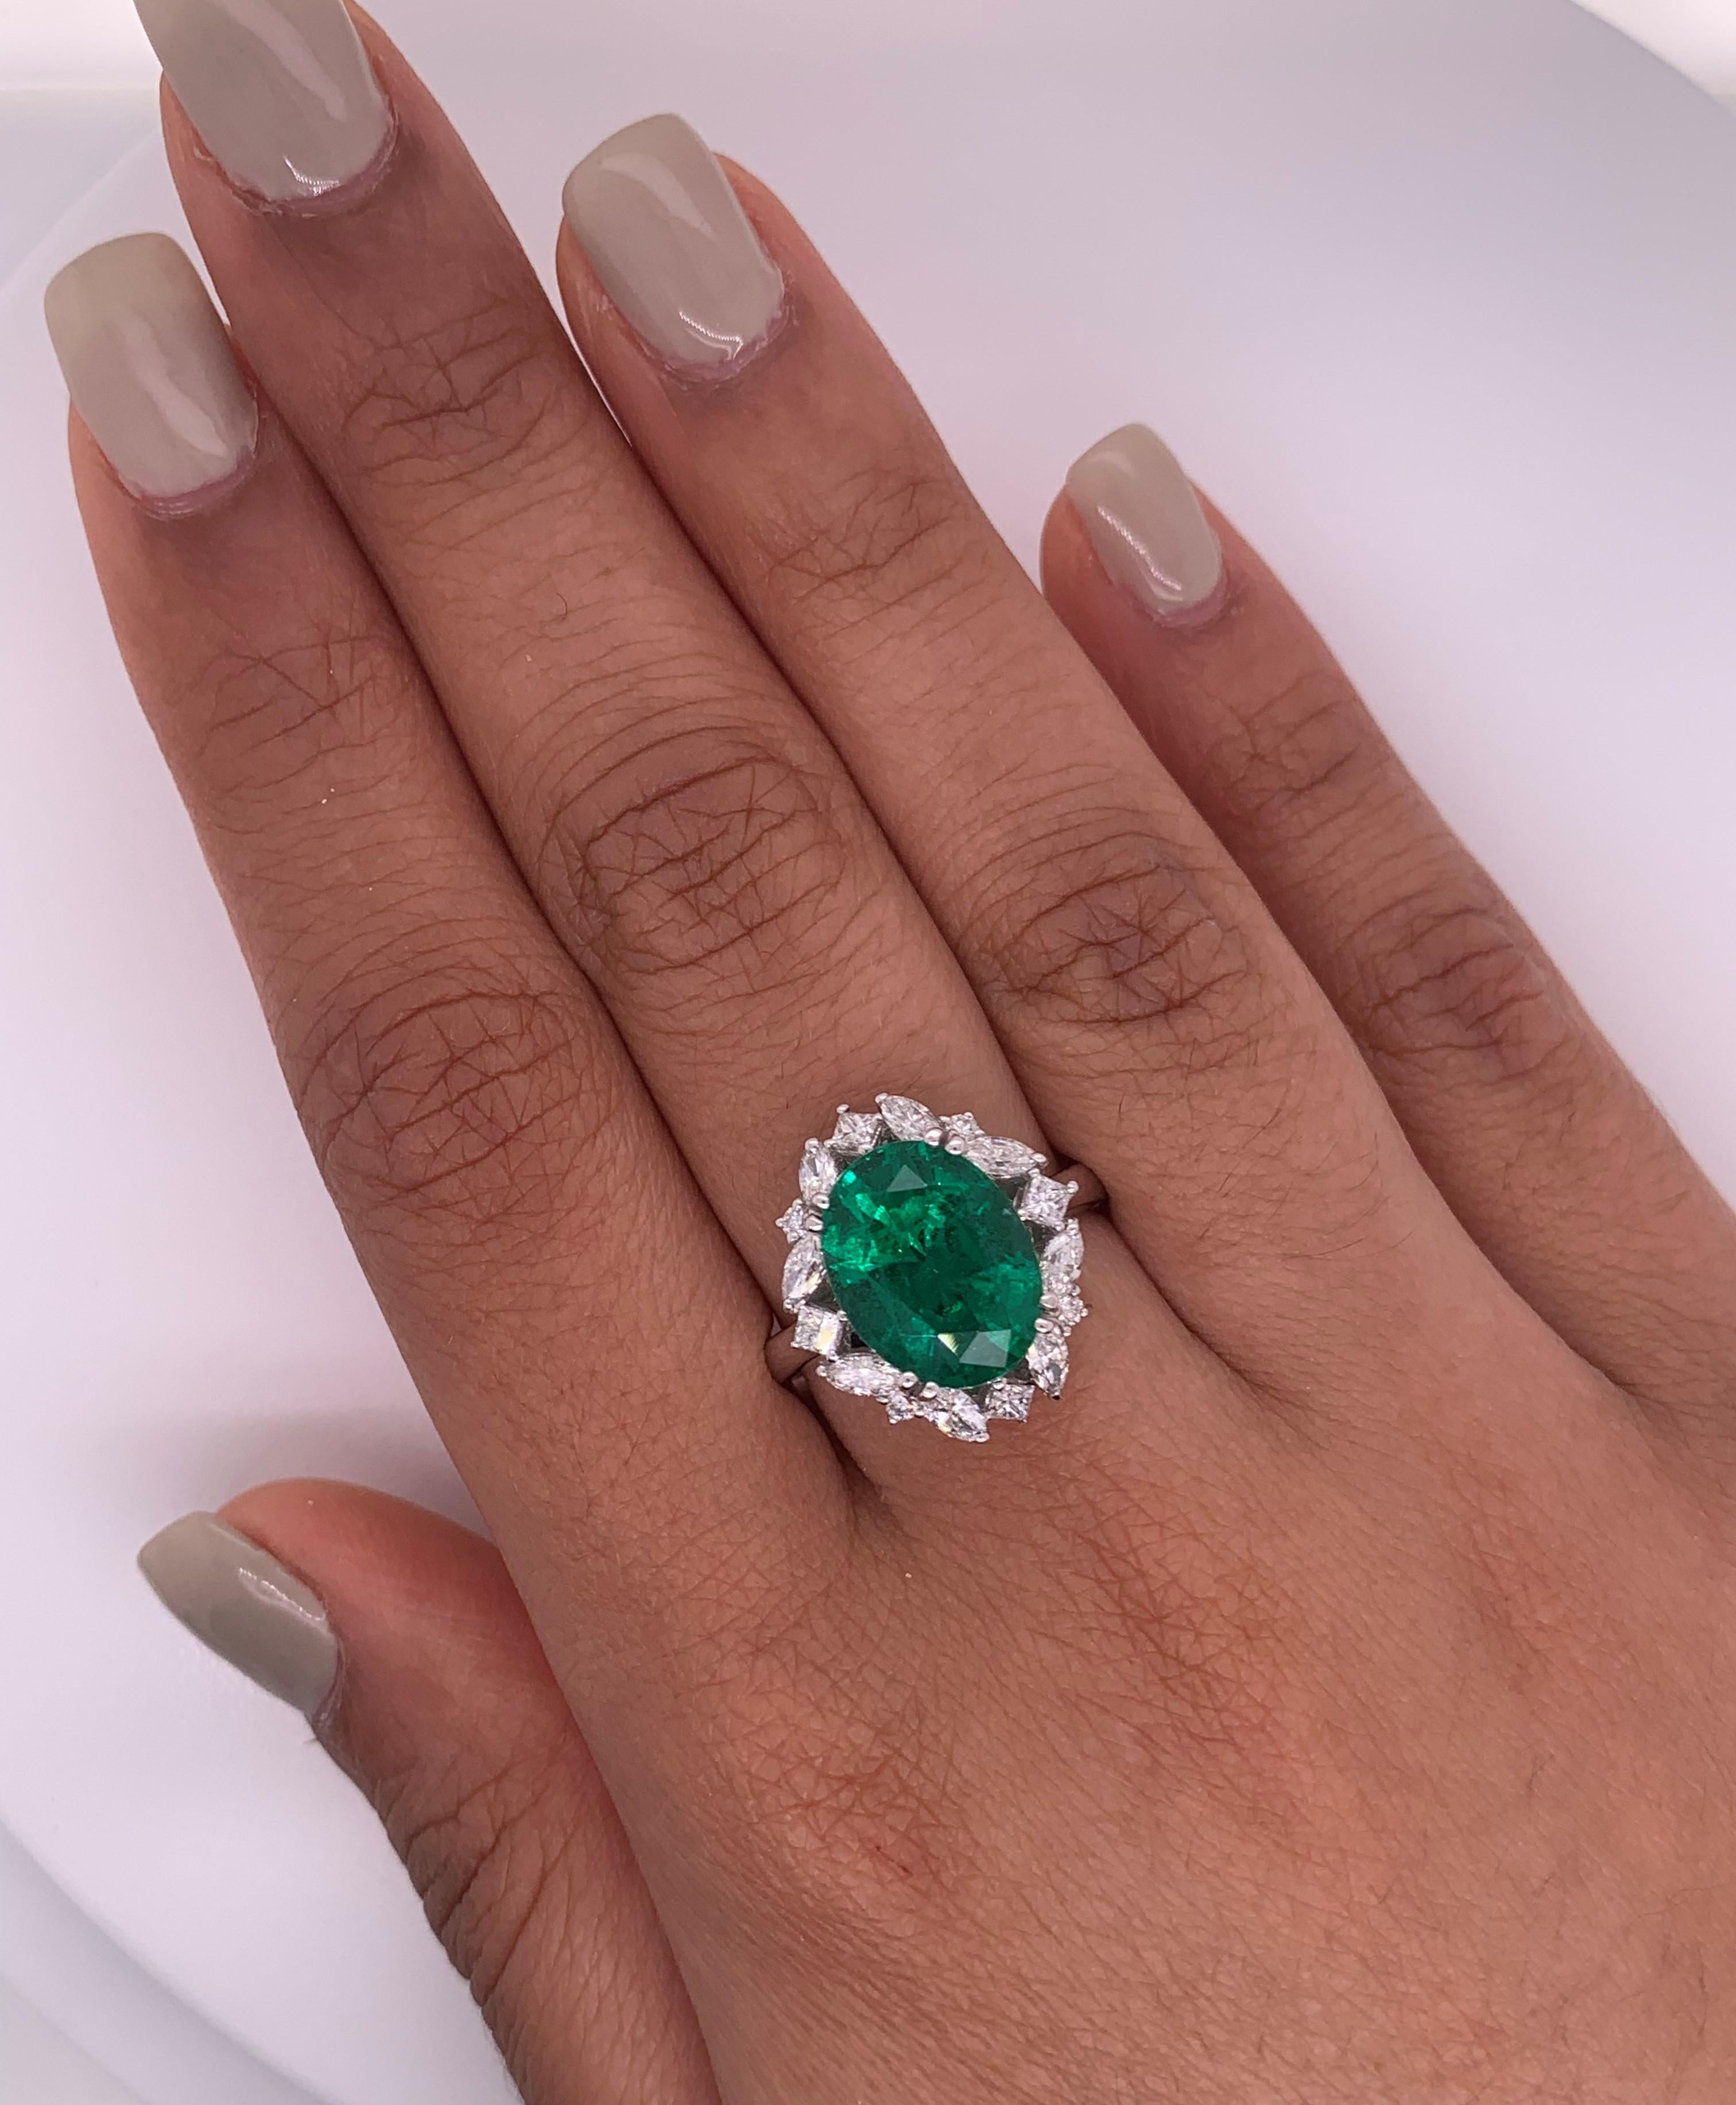 Showcasing the most vibrant Colombian and Zambian Emeralds and Diamonds, Sunita Nahata dedicates this collection to her home city of Jaipur where the jewelry industry dates back to the early 1700s. Jaipur is also an epicenter for the global emerald